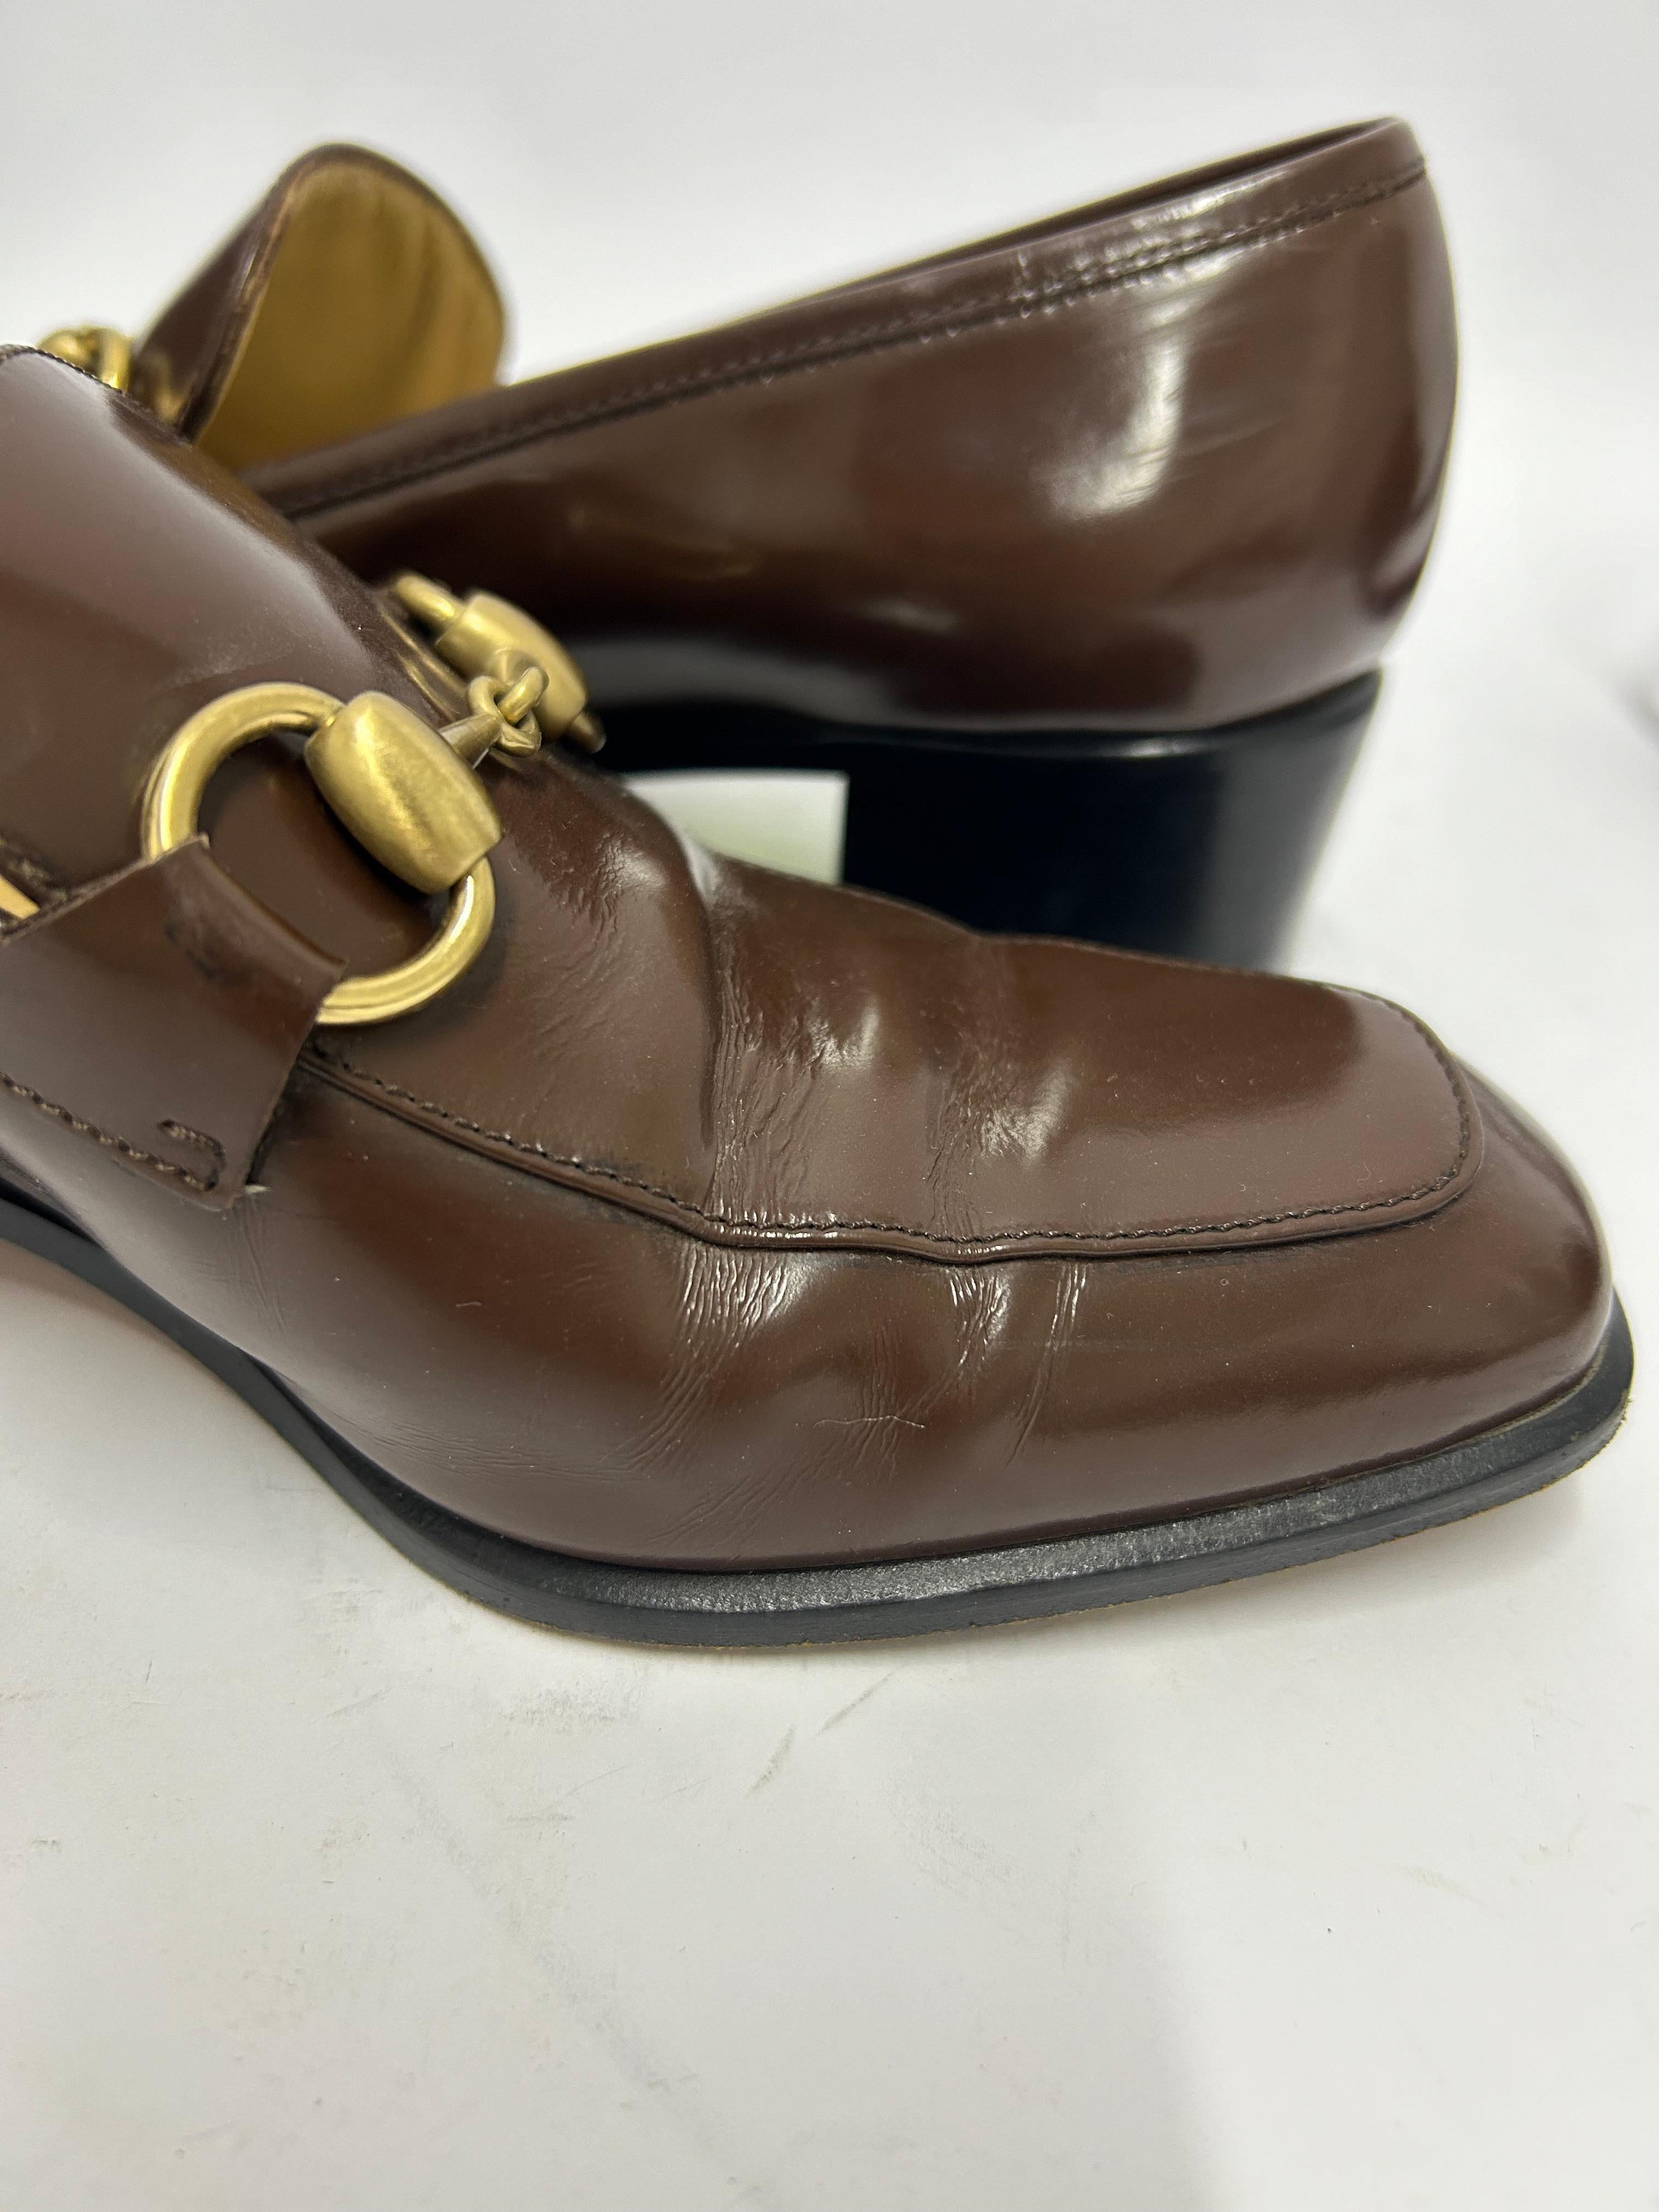 Gucci Horsebit Leather Loafers Size EU 36.5 For Sale 9